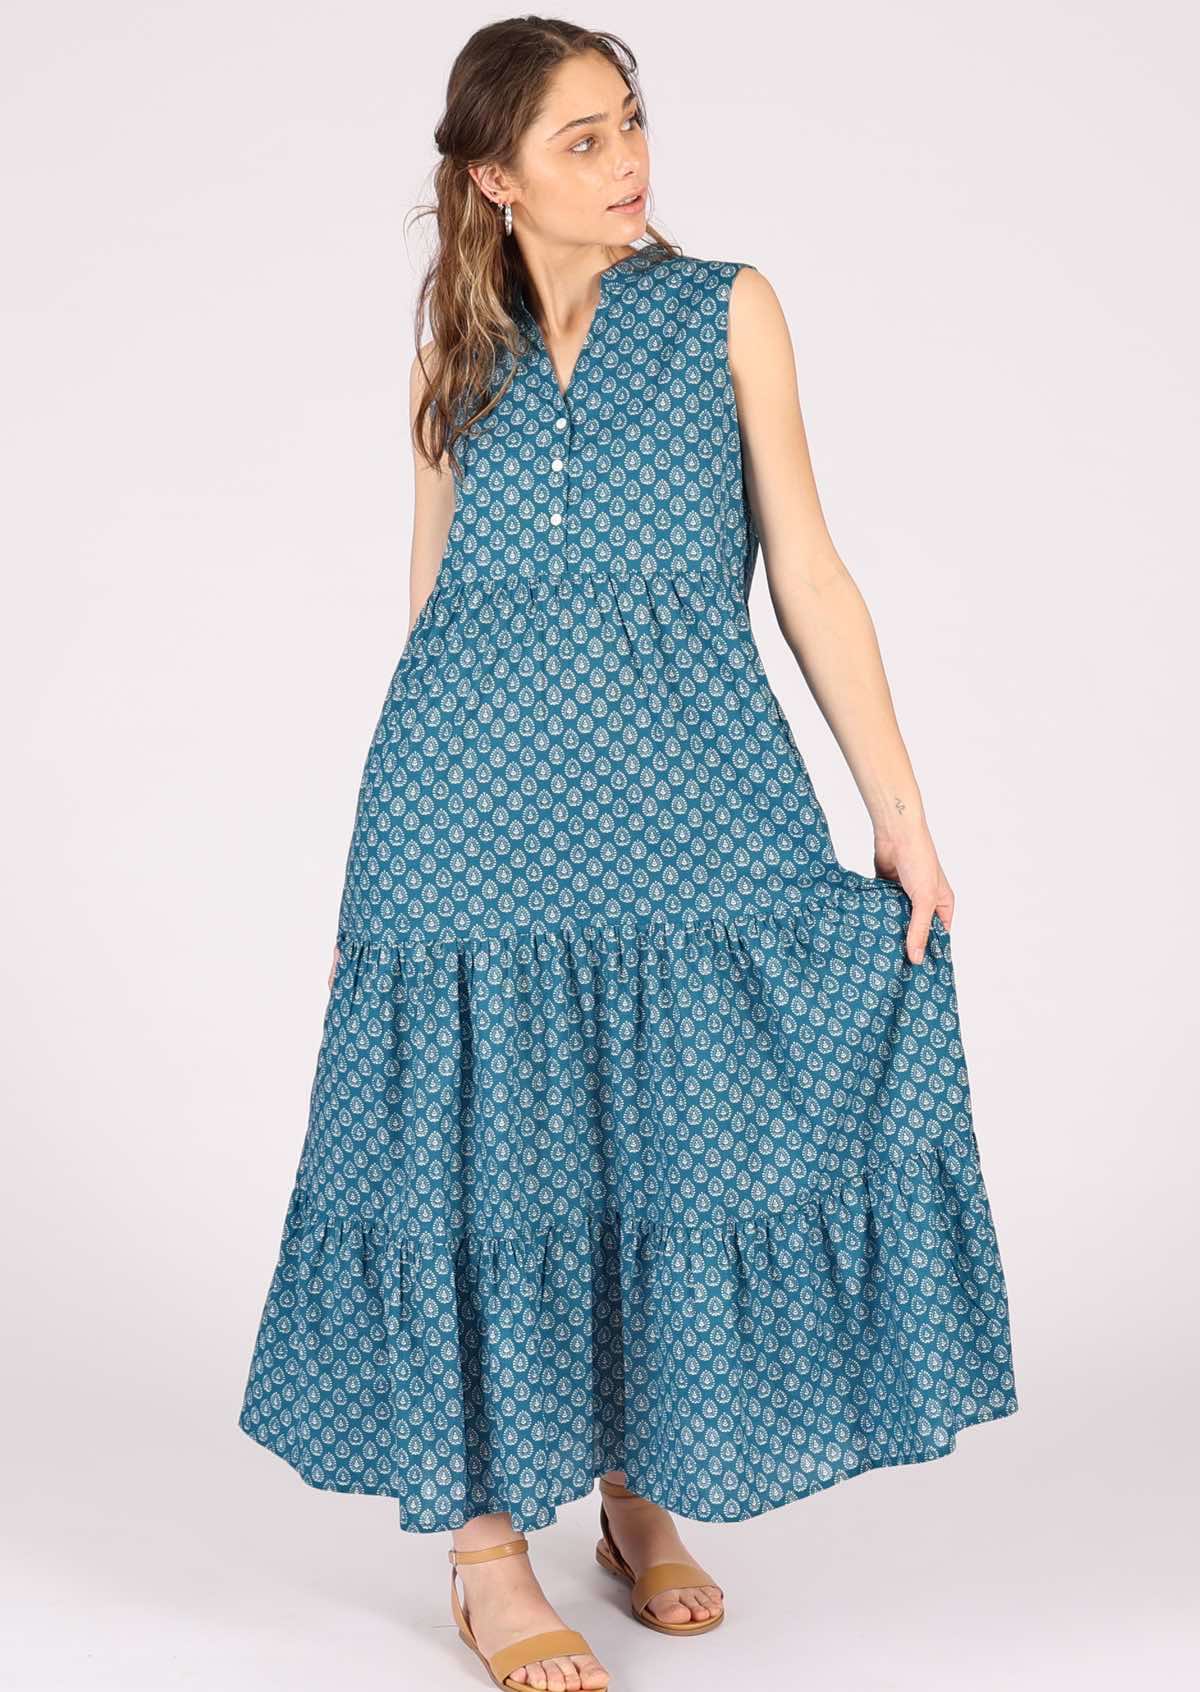 Sleeveless cotton maxi dress with buttoned bodice